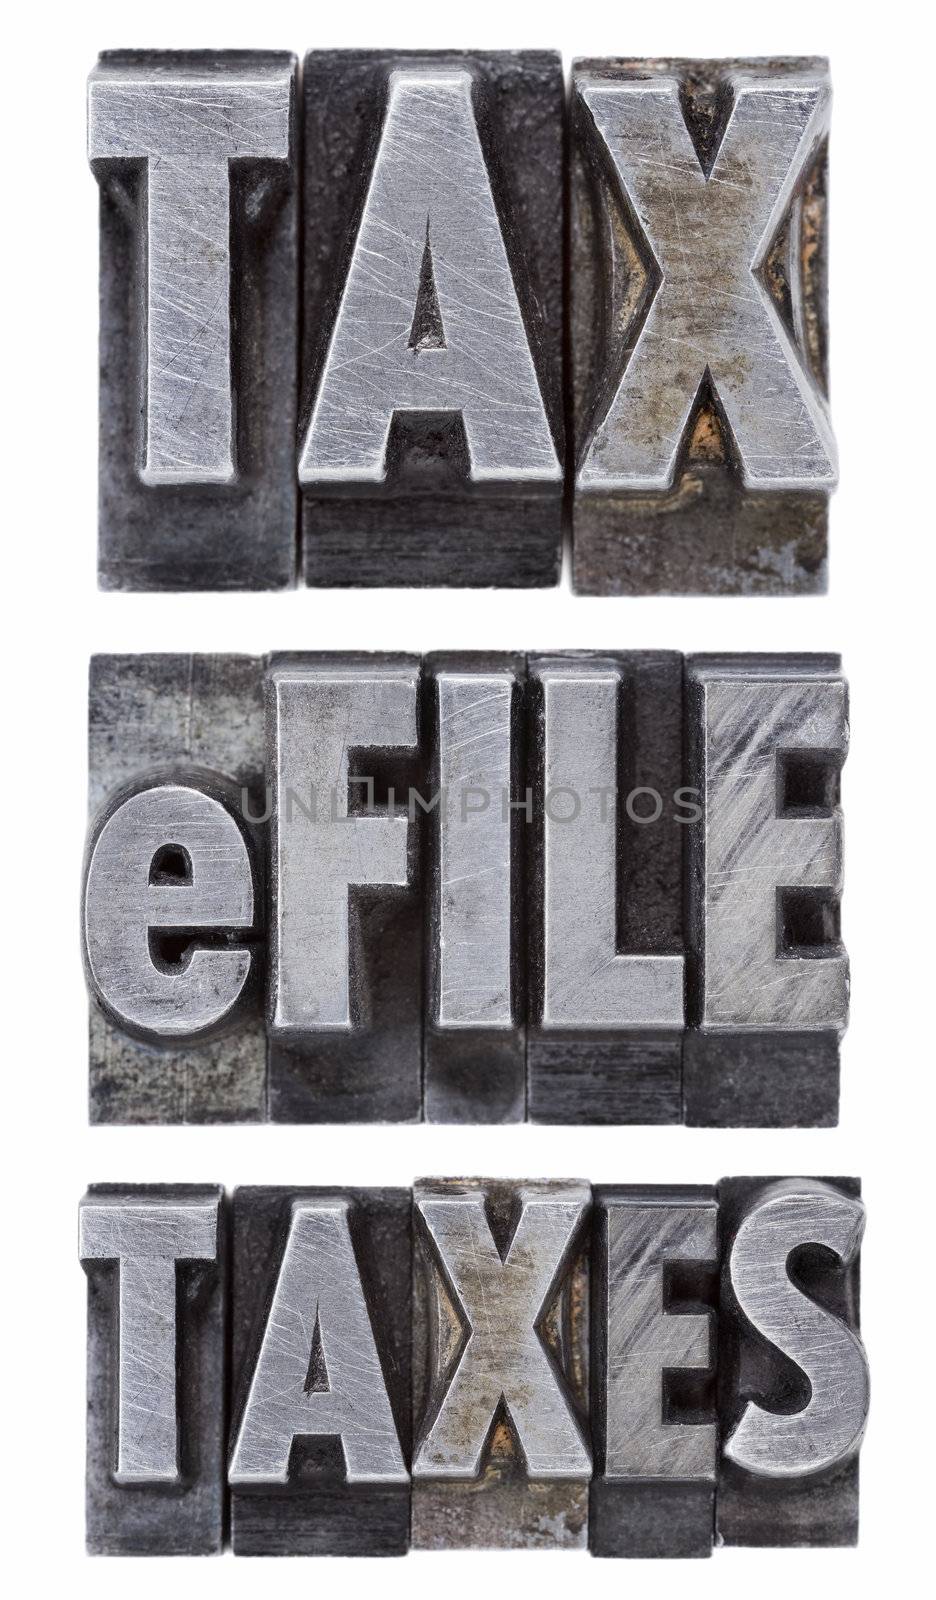 e-file taxes - tax concept by PixelsAway